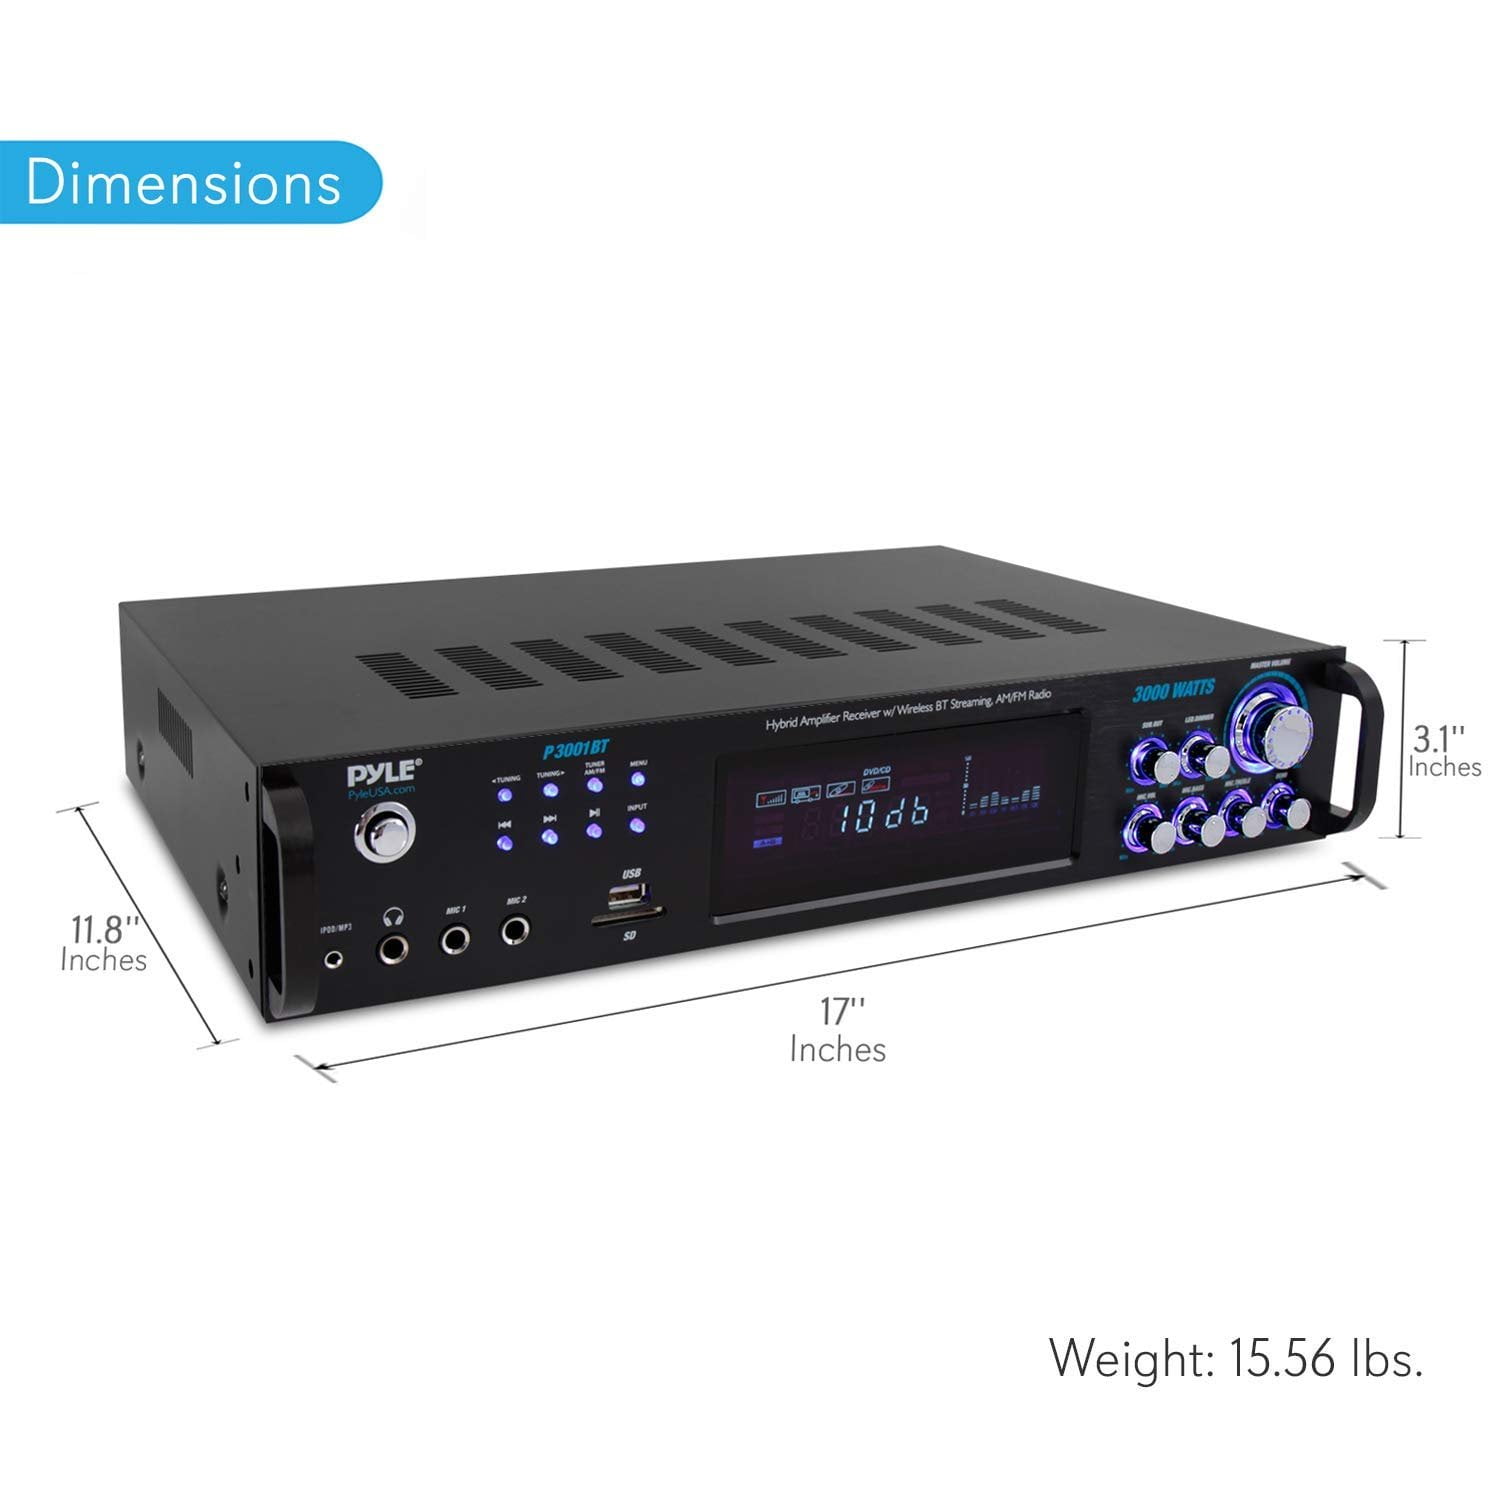 MP3/USB/SD/AUX/FM Radio Pyle Bluetooth Hybrid Amplifier Receiver Renewed Home Theater Pre-Amplifier with Wireless Streaming Ability 3000 Watt 